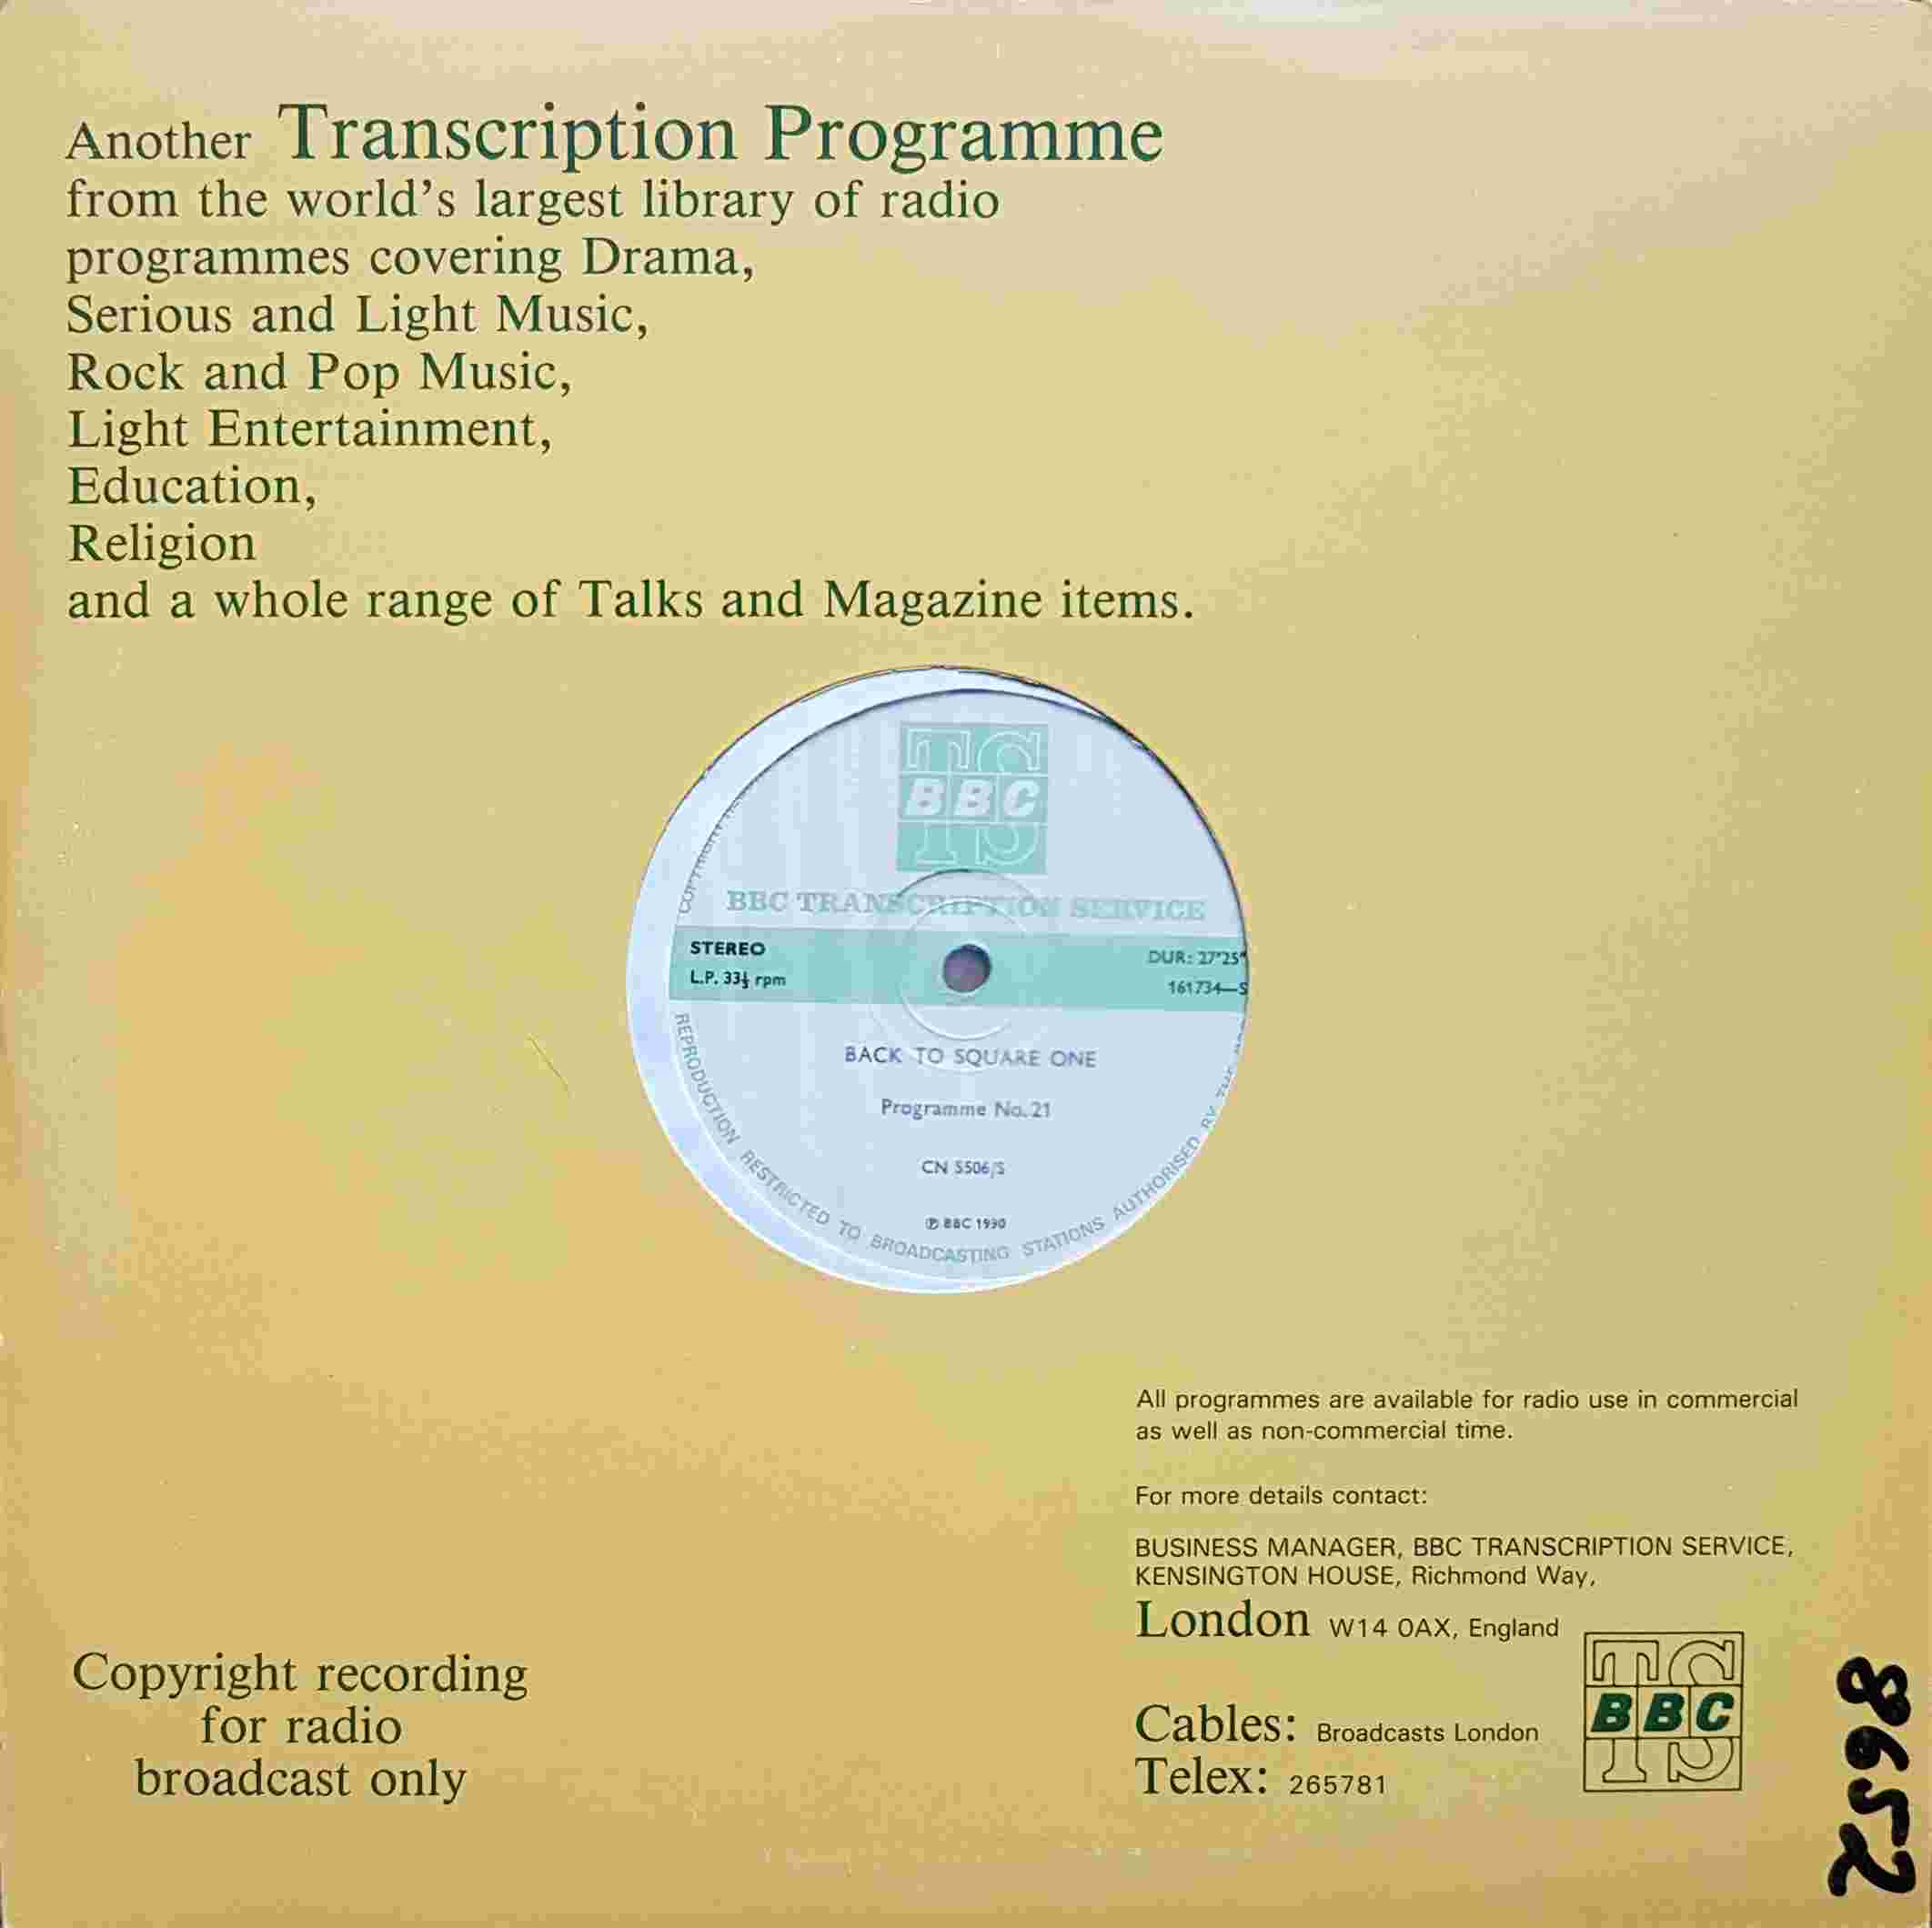 Picture of CN 5506 S 11 Back to square one - Programme 21 & 22 by artist Chris Serle from the BBC records and Tapes library